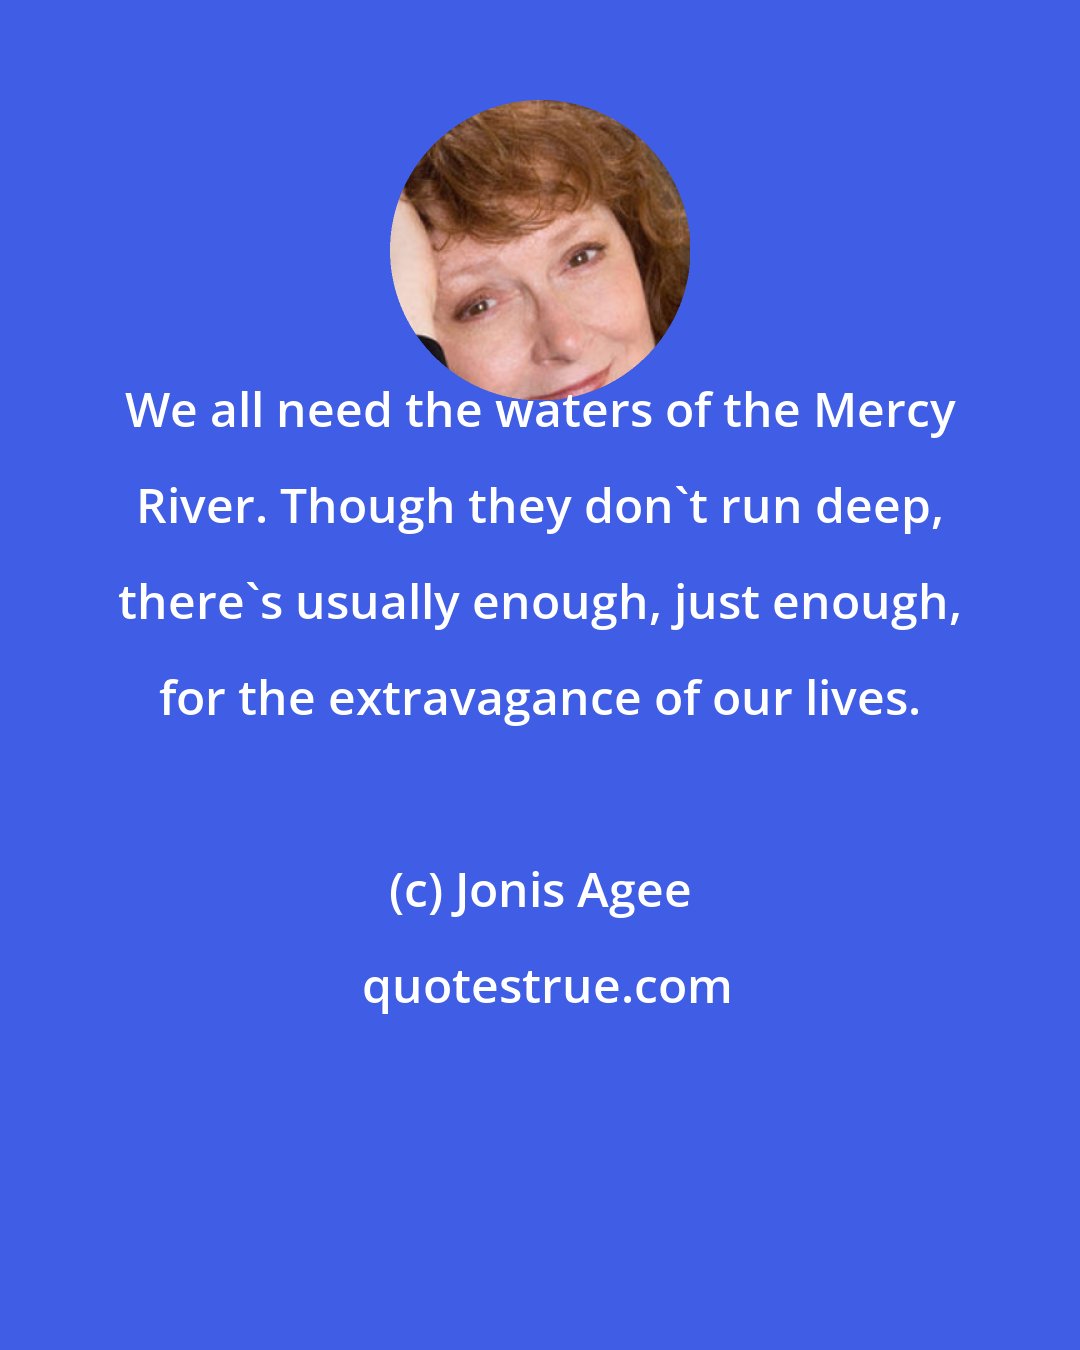 Jonis Agee: We all need the waters of the Mercy River. Though they don't run deep, there's usually enough, just enough, for the extravagance of our lives.